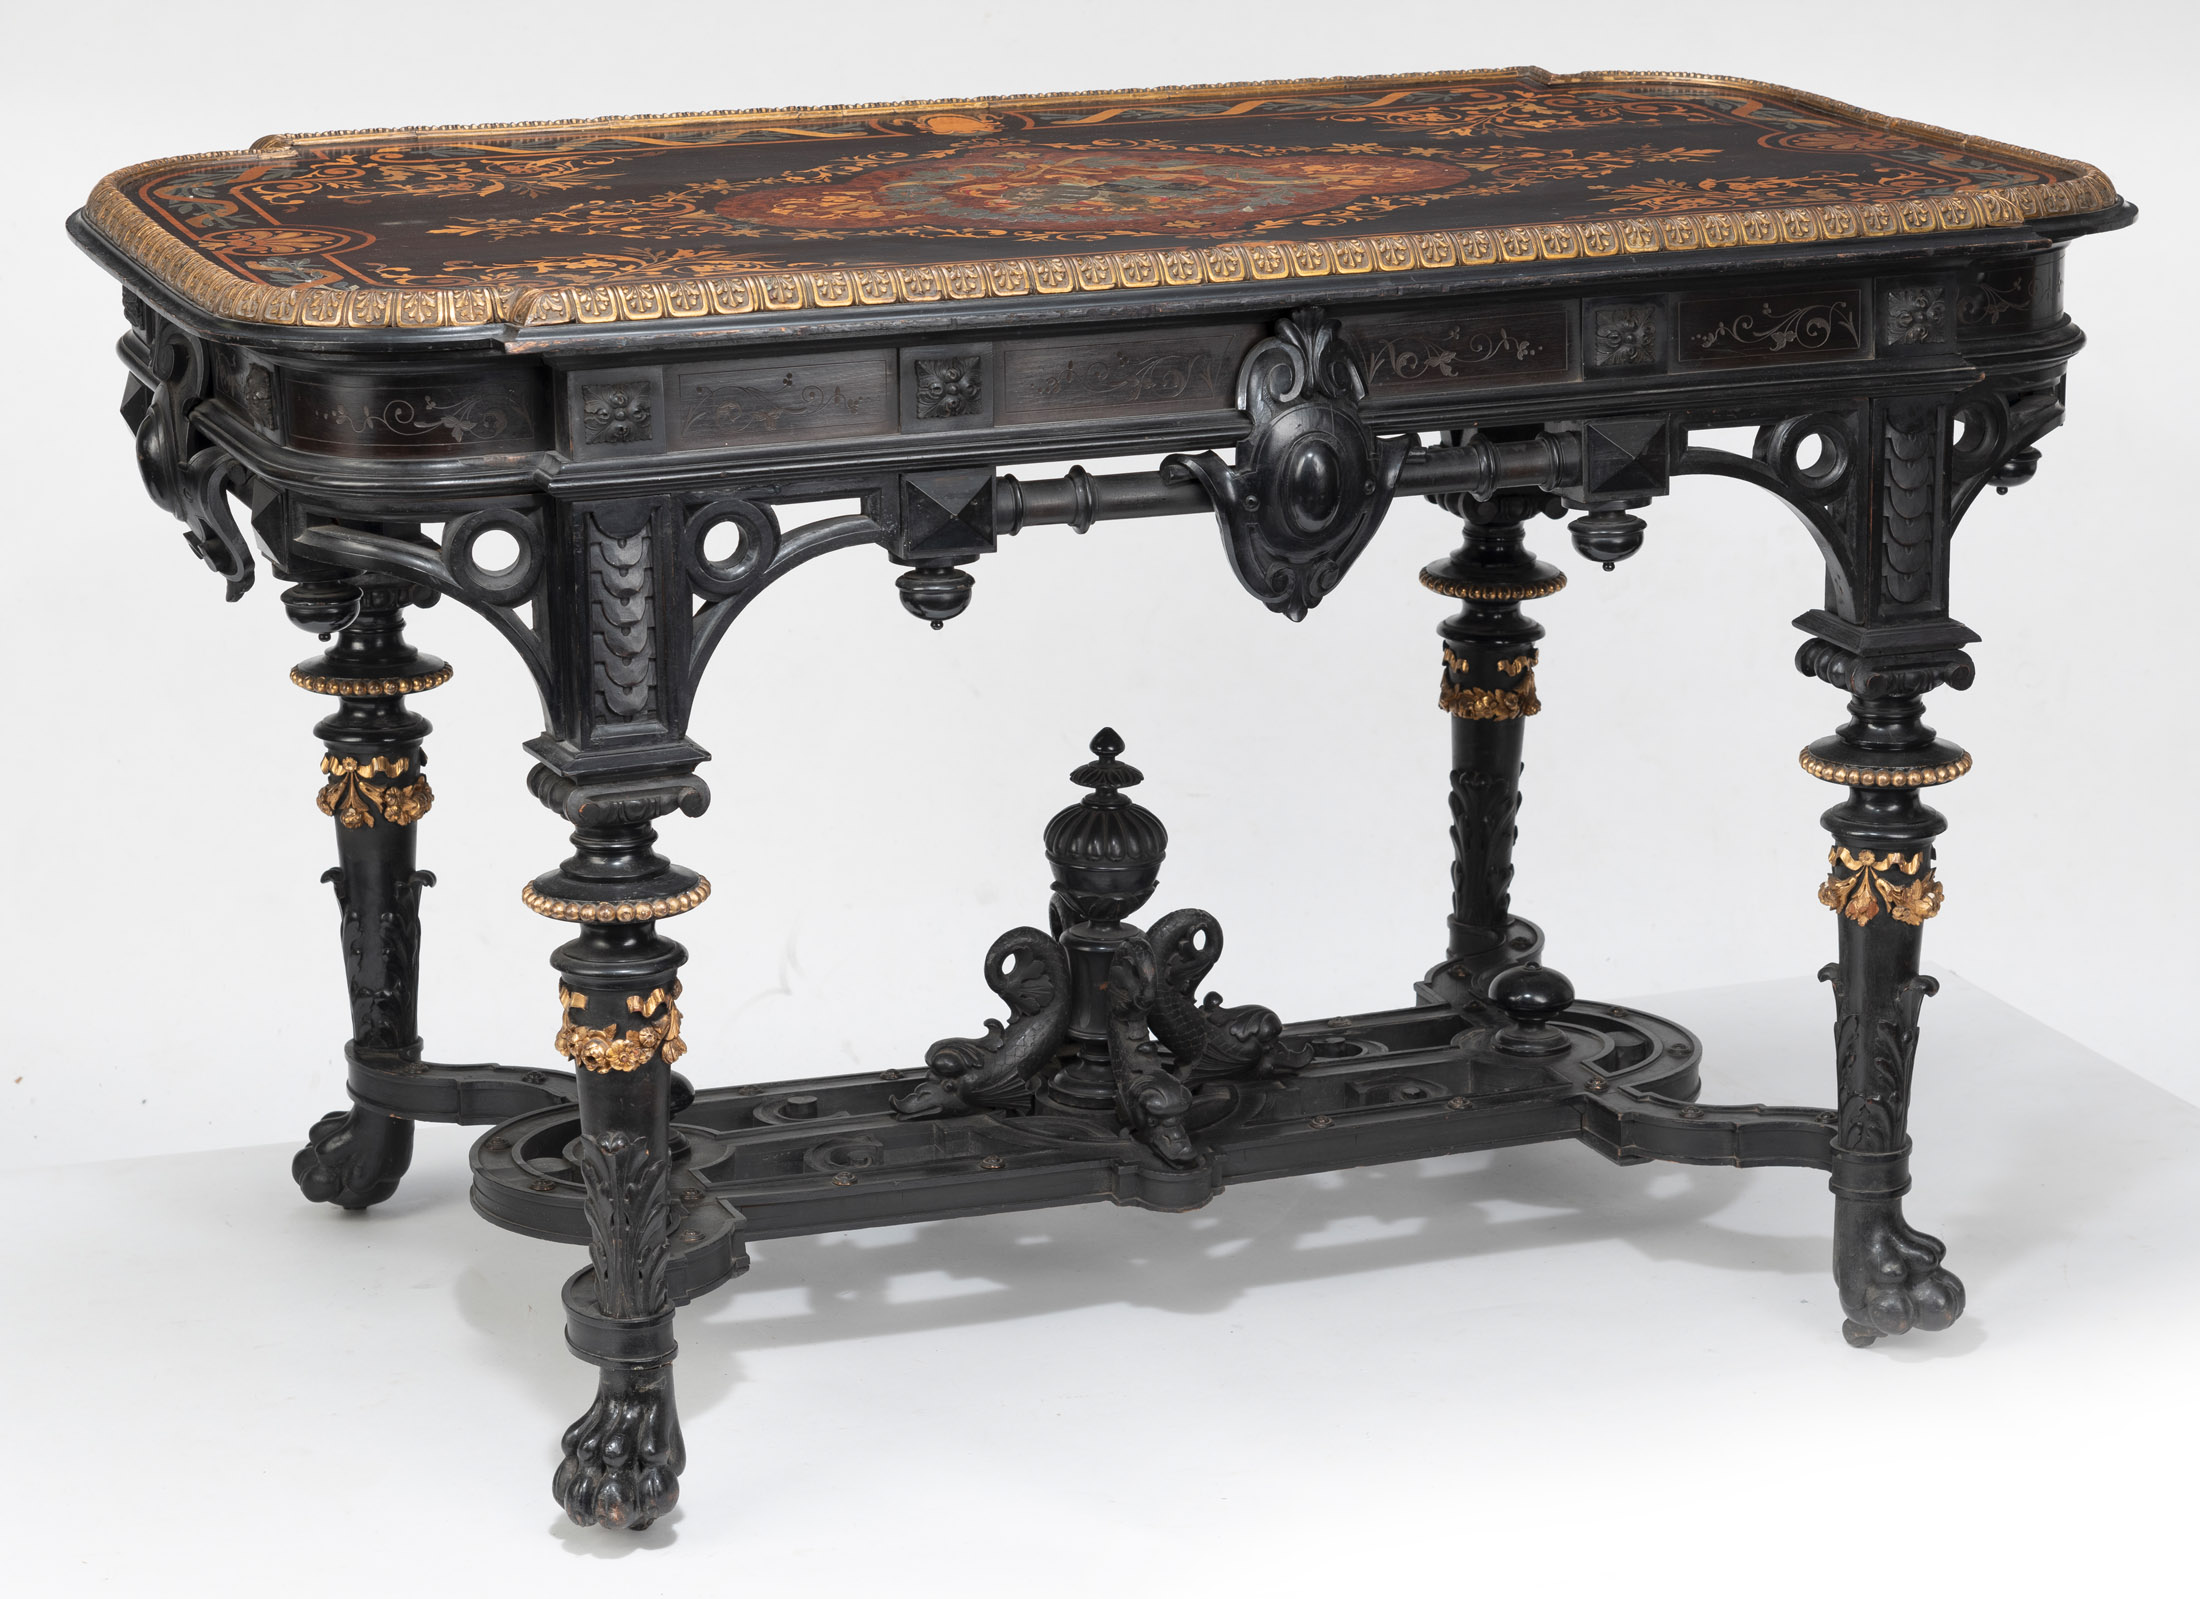 Magnificent centre table with the alliance coat of arms of Agnes von Württemberg and Prince Heinric - Image 8 of 11